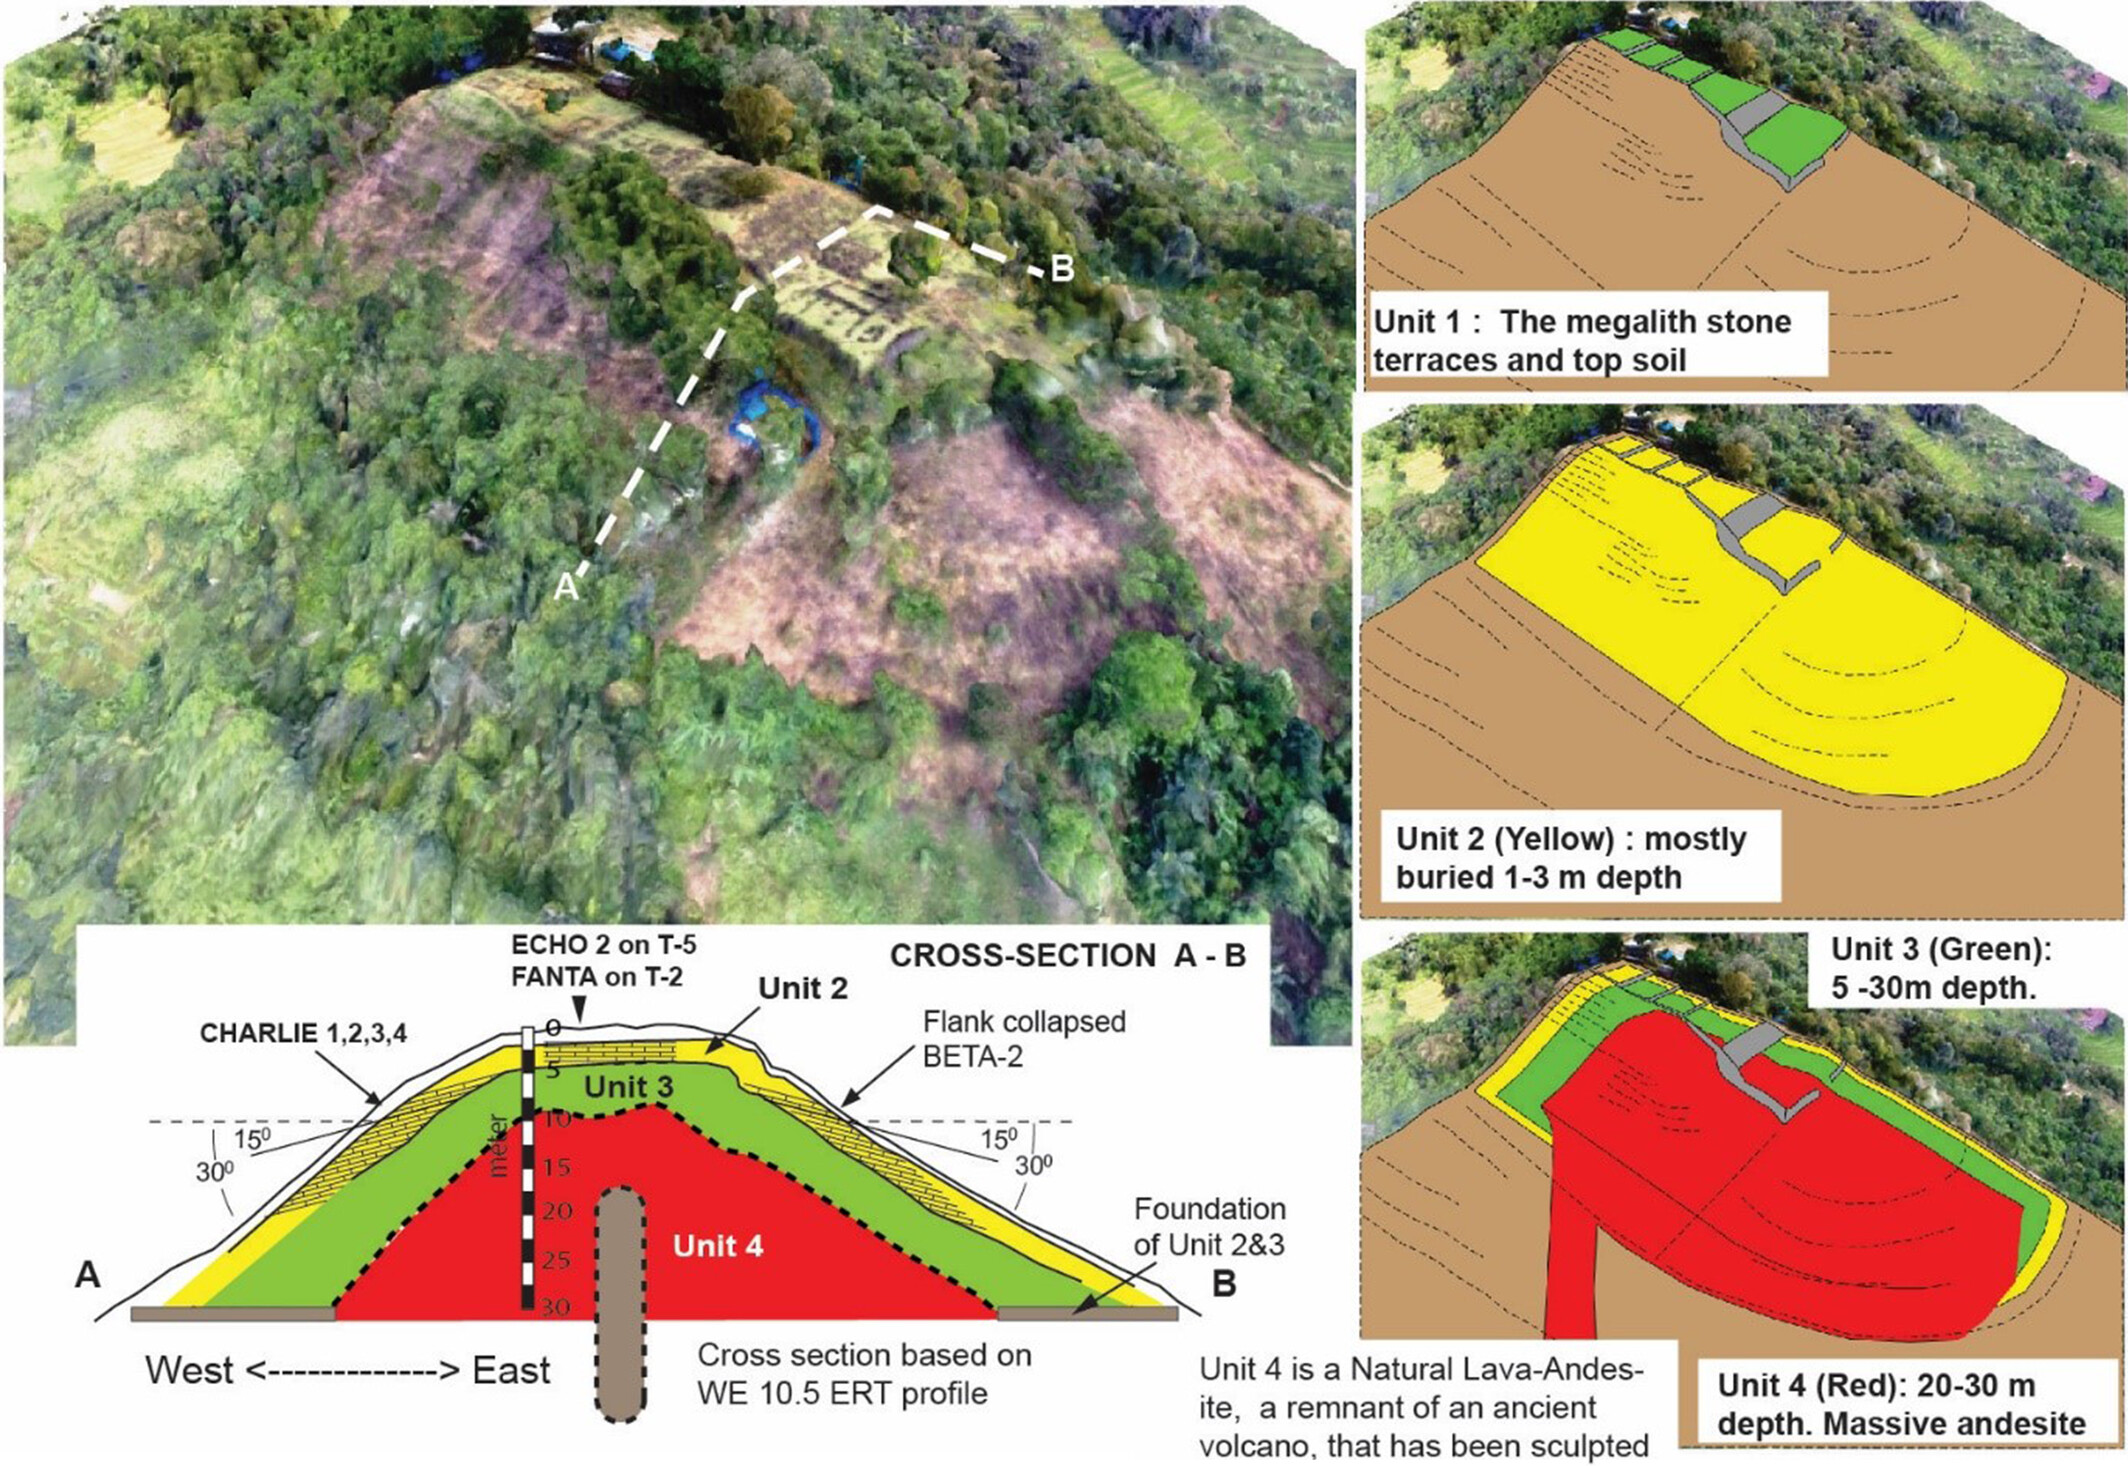 Simplified reconstruction of Gunung Padang. Unit 1 represents the surficial stone terraces constructed between 2000 and 1100 BCE or more recently. Unit 2 (highlighted in yellow) corresponds to a buried pyramidal-shaped layer composed of columnar rocks and was built around 6000–5500 BCE. Unit 3 (shown in green) dates back to 25 000–14 000 BCE. Unit 4 represents the sculpted massive basaltic-andesite lava.